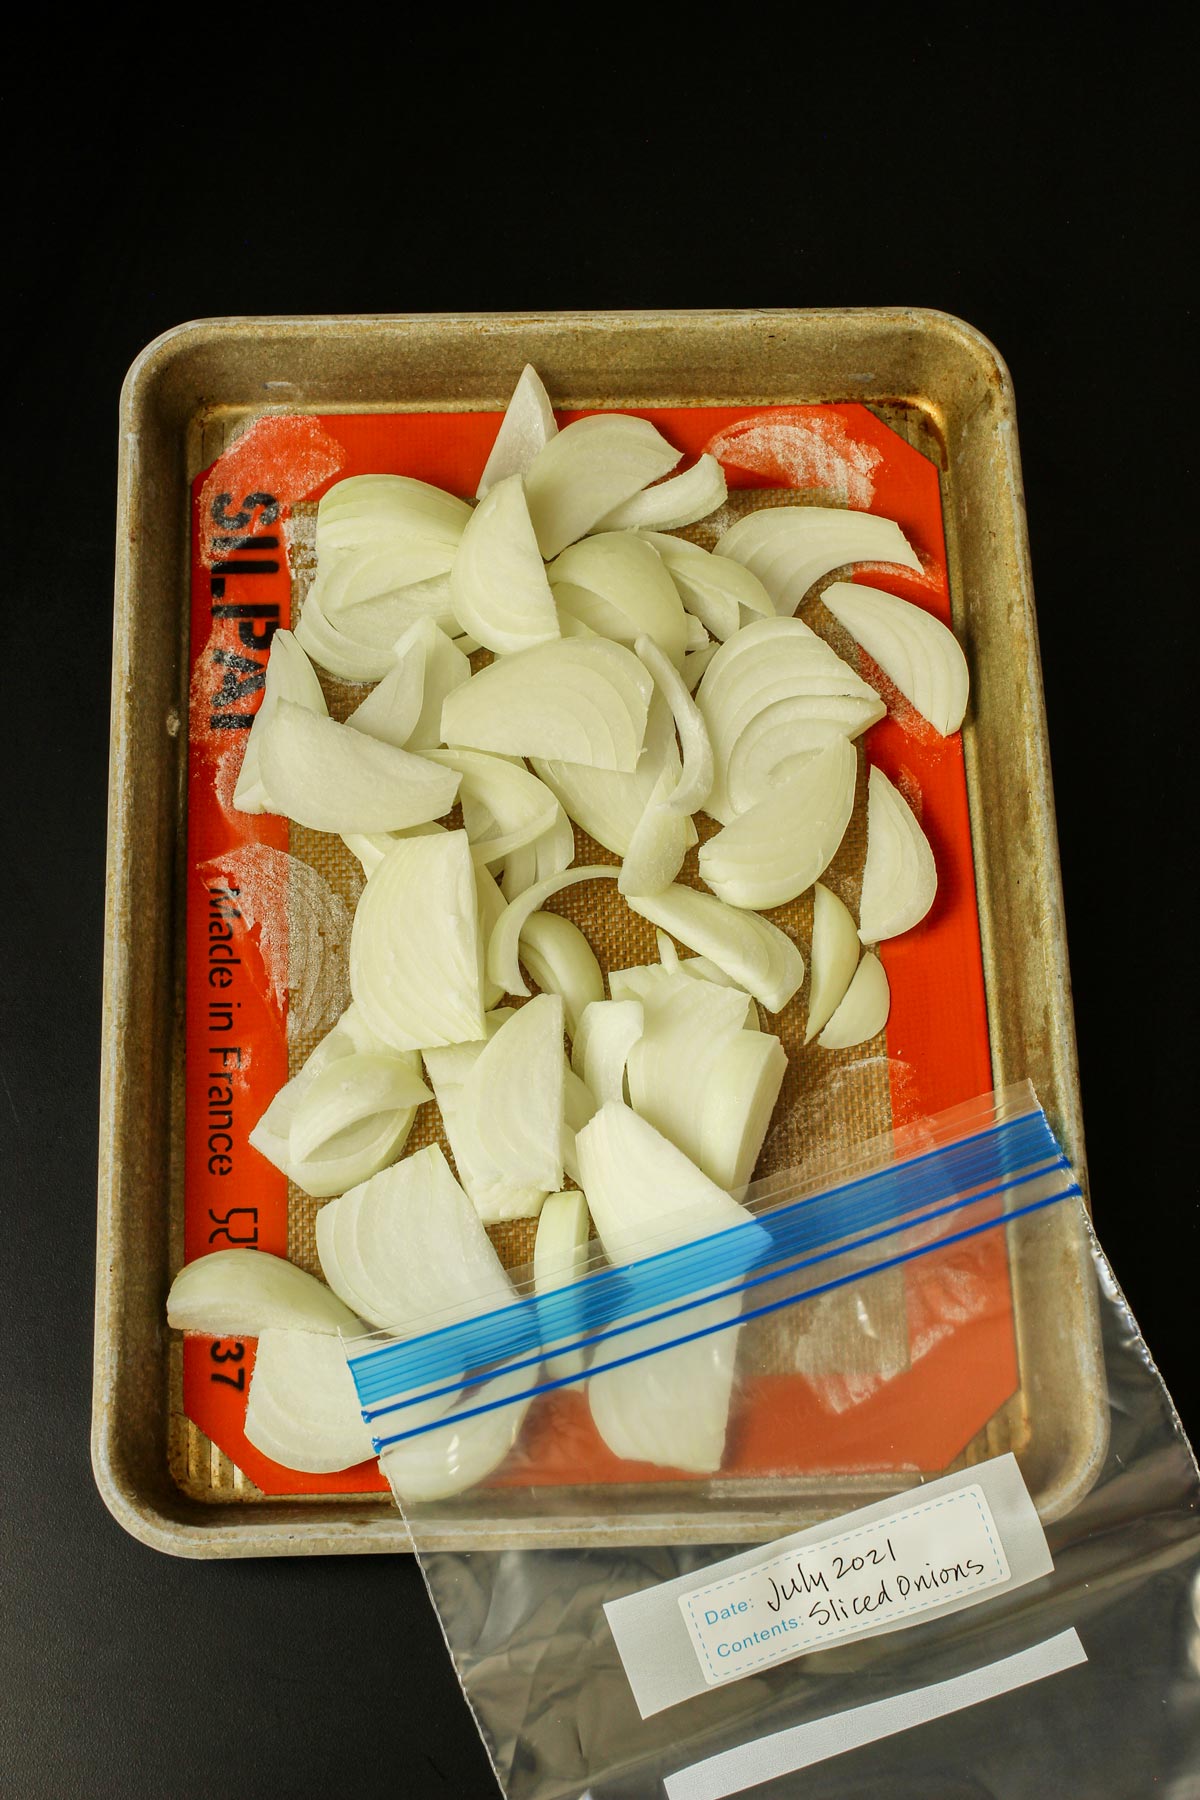 frozen sliced onions on quarter sheet pan with labeled ziptop freezer bag.